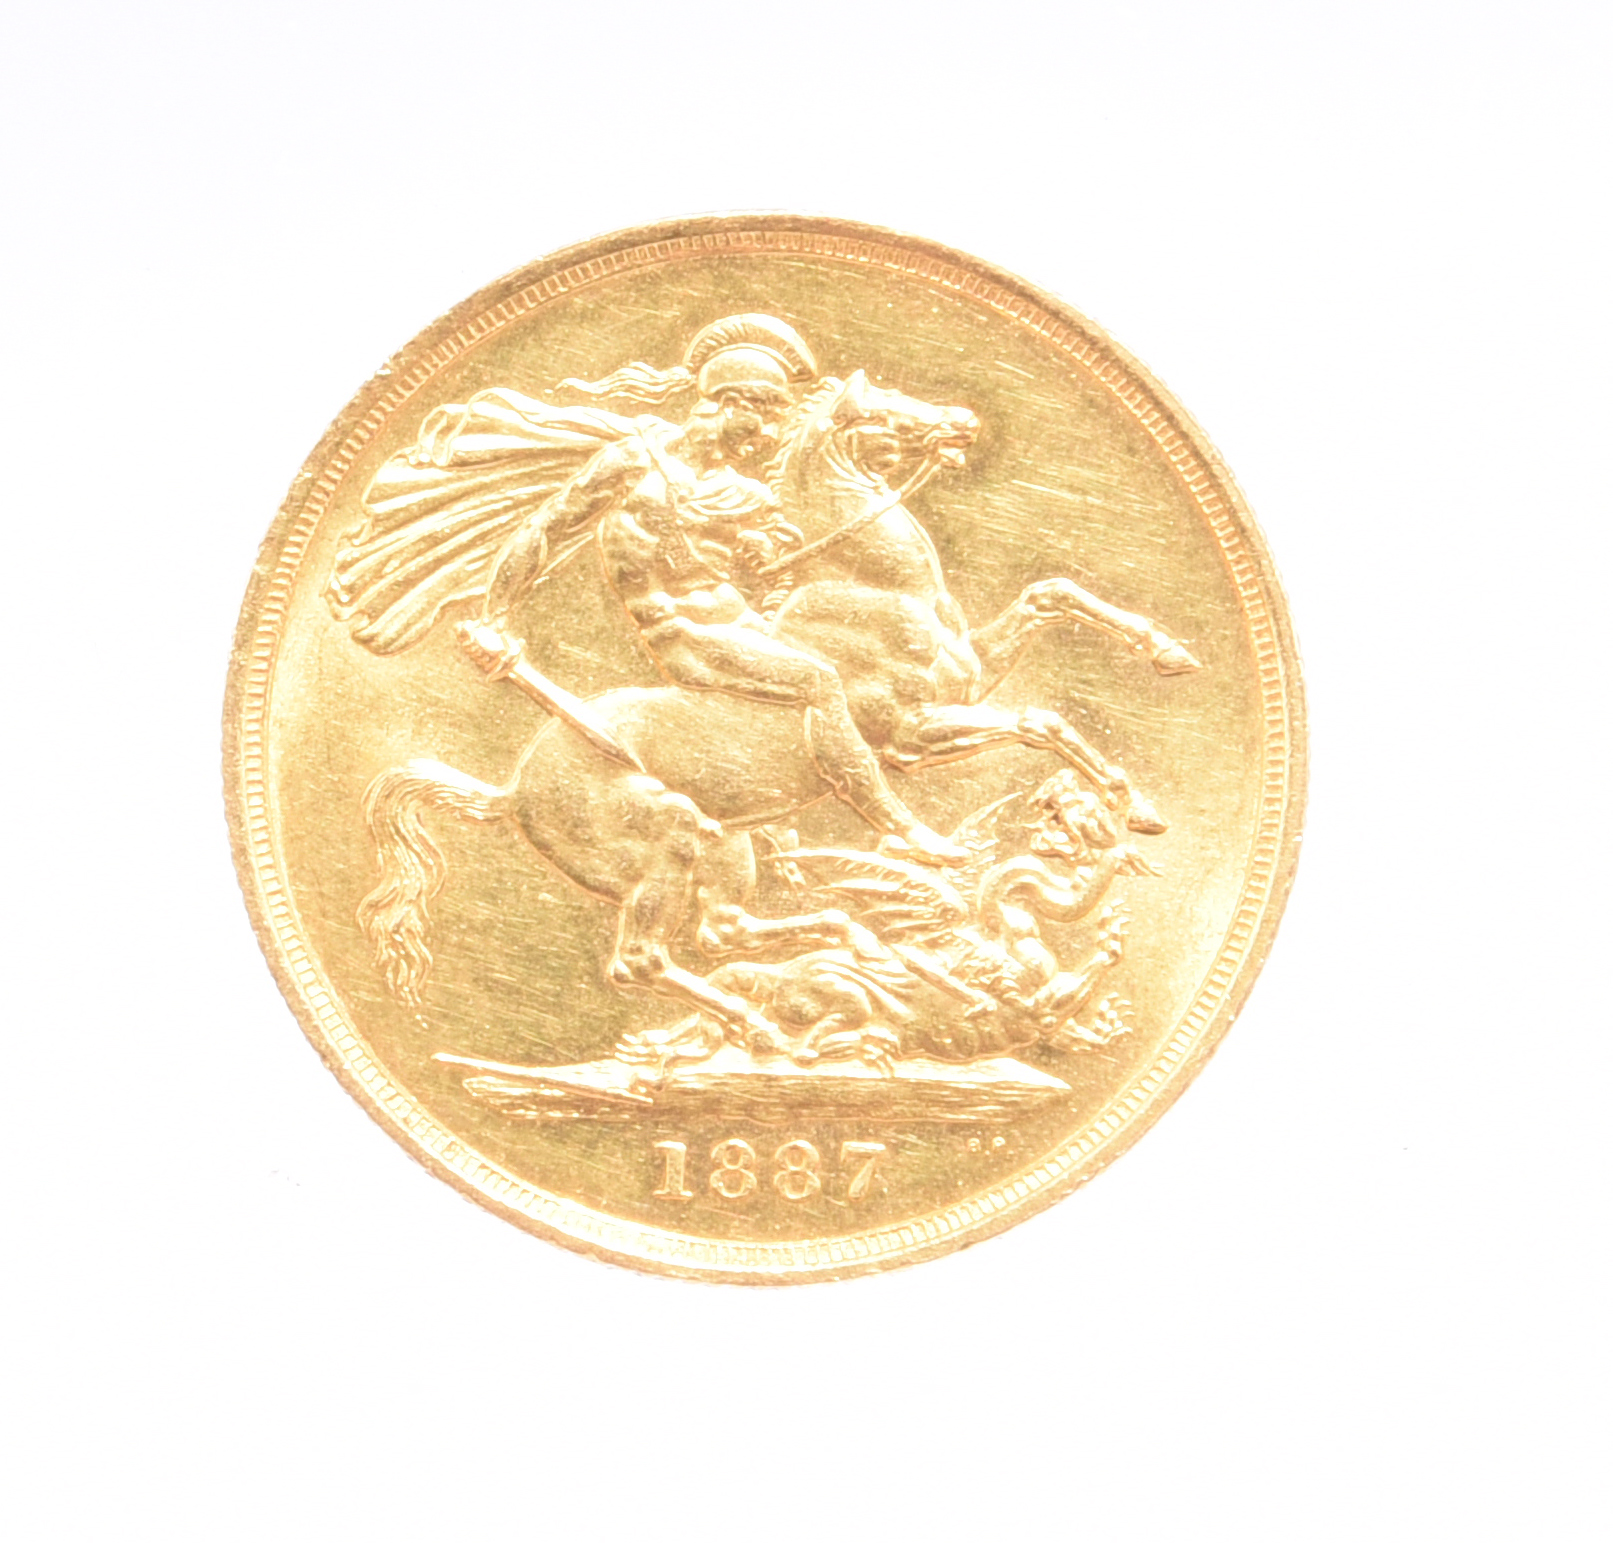 Victoria, gold two pounds, 1887 (S 3865), very minor marks, extremely fine or nearly so. - Image 2 of 2